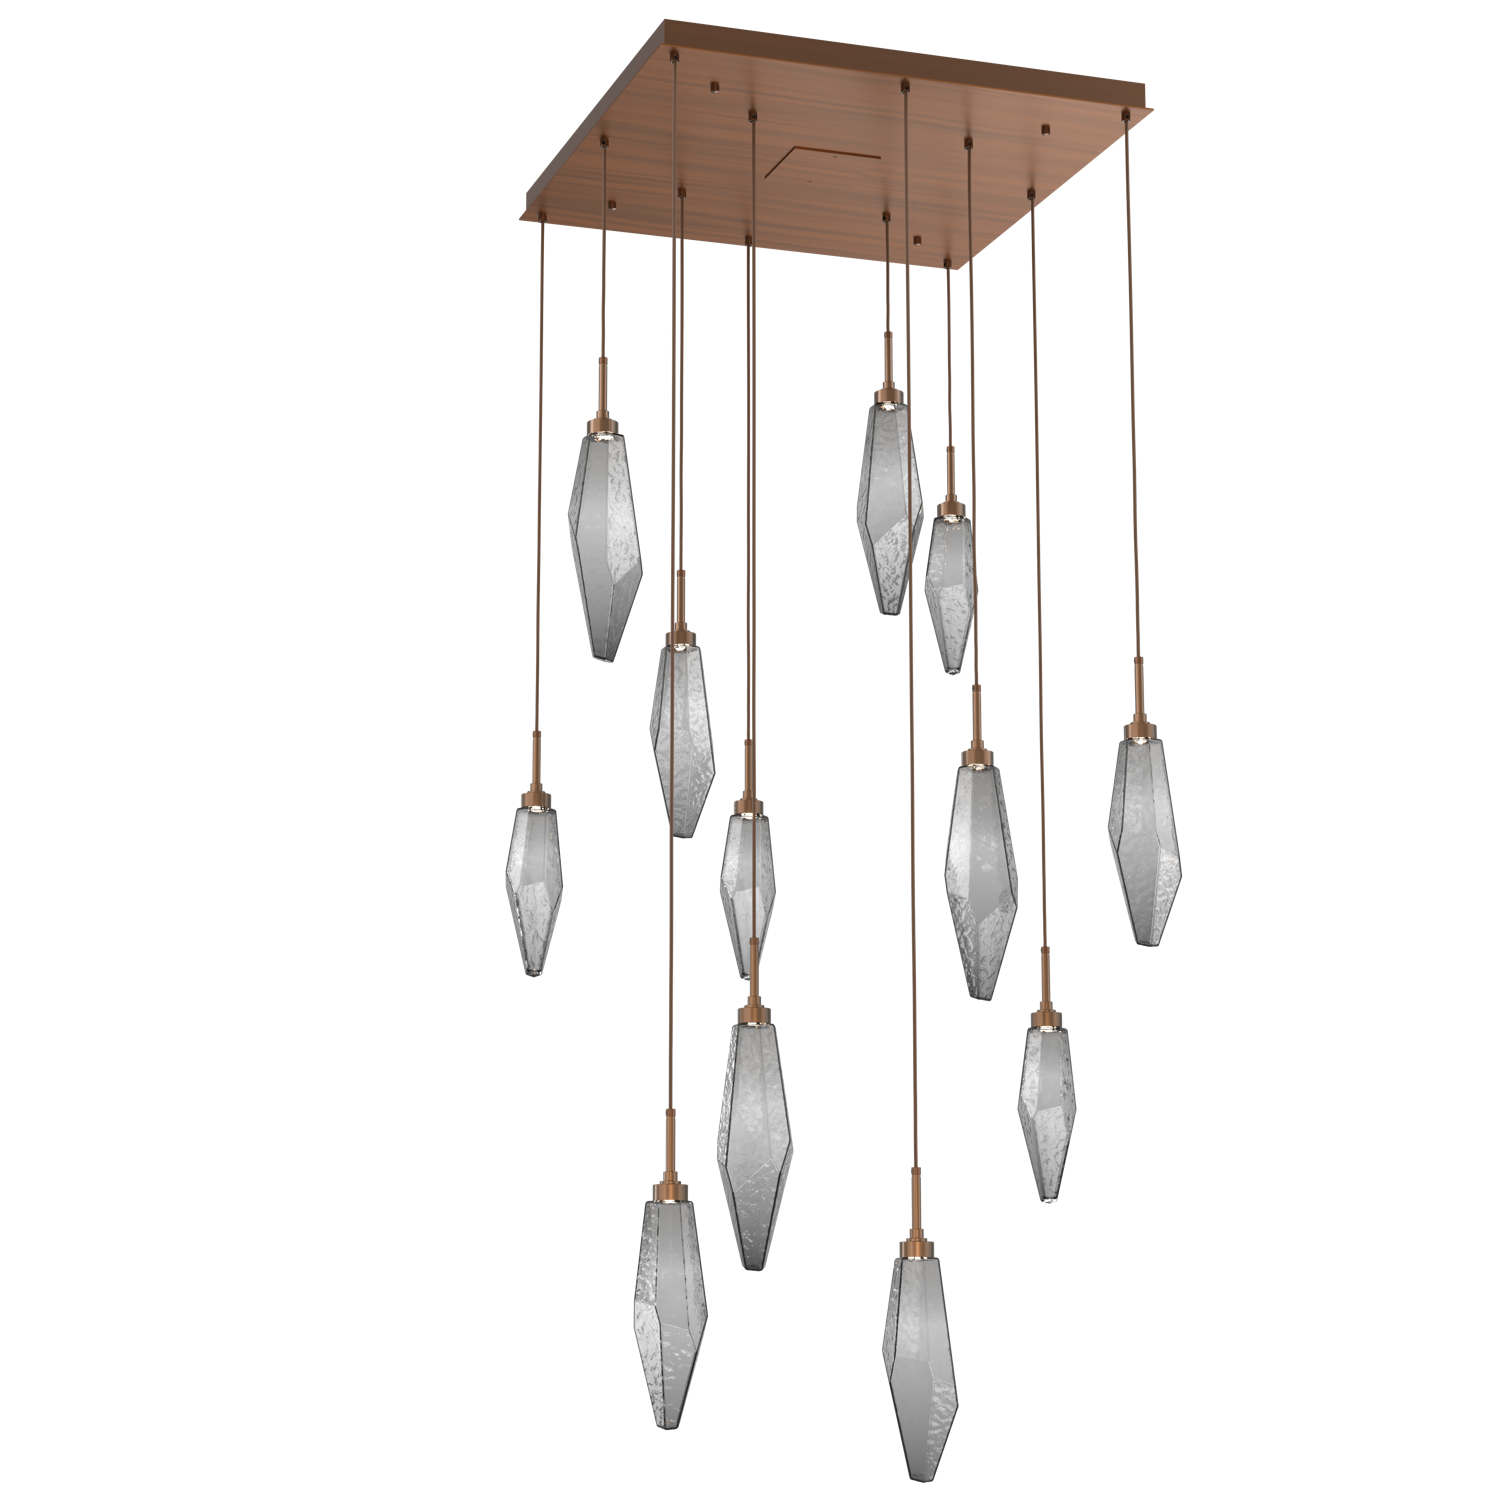 CHB0050-12-RB-CS-Hammerton-Studio-Rock-Crystal-12-light-square-pendant-chandelier-with-oil-rubbed-bronze-finish-and-chilled-smoke-glass-shades-and-LED-lamping